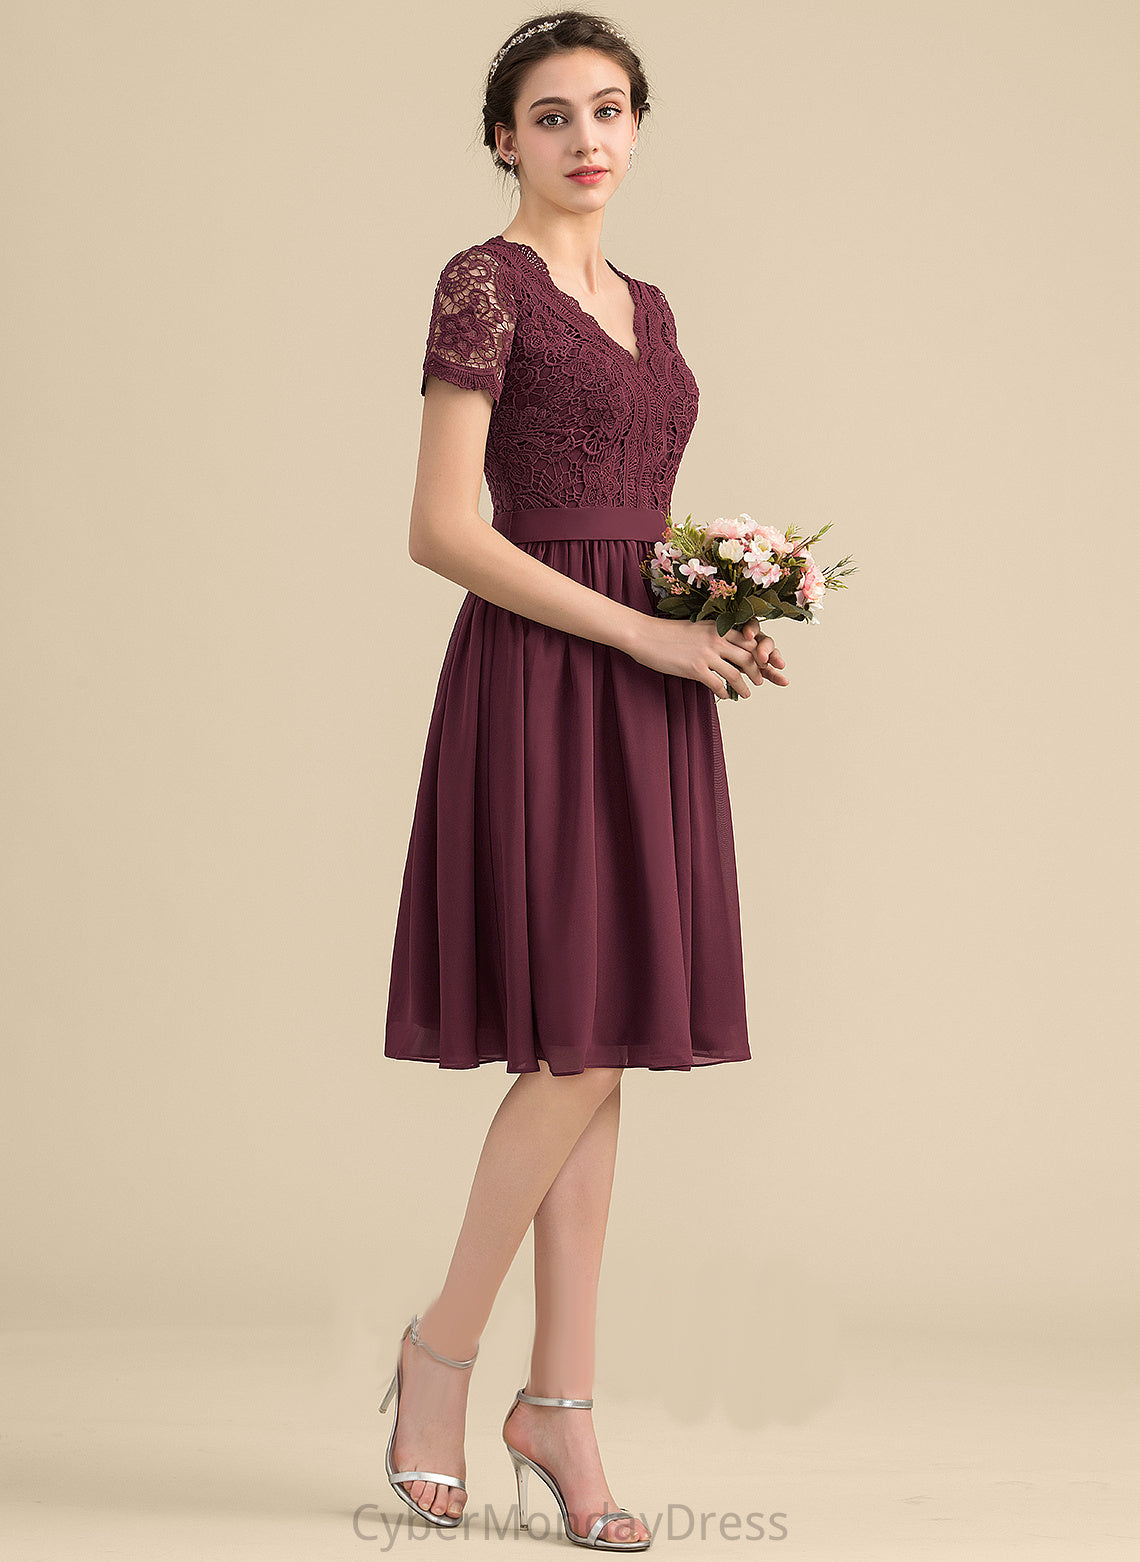 Chiffon Dress Lace V-neck Madilyn Cocktail Dresses Cocktail A-Line Lace With Knee-Length